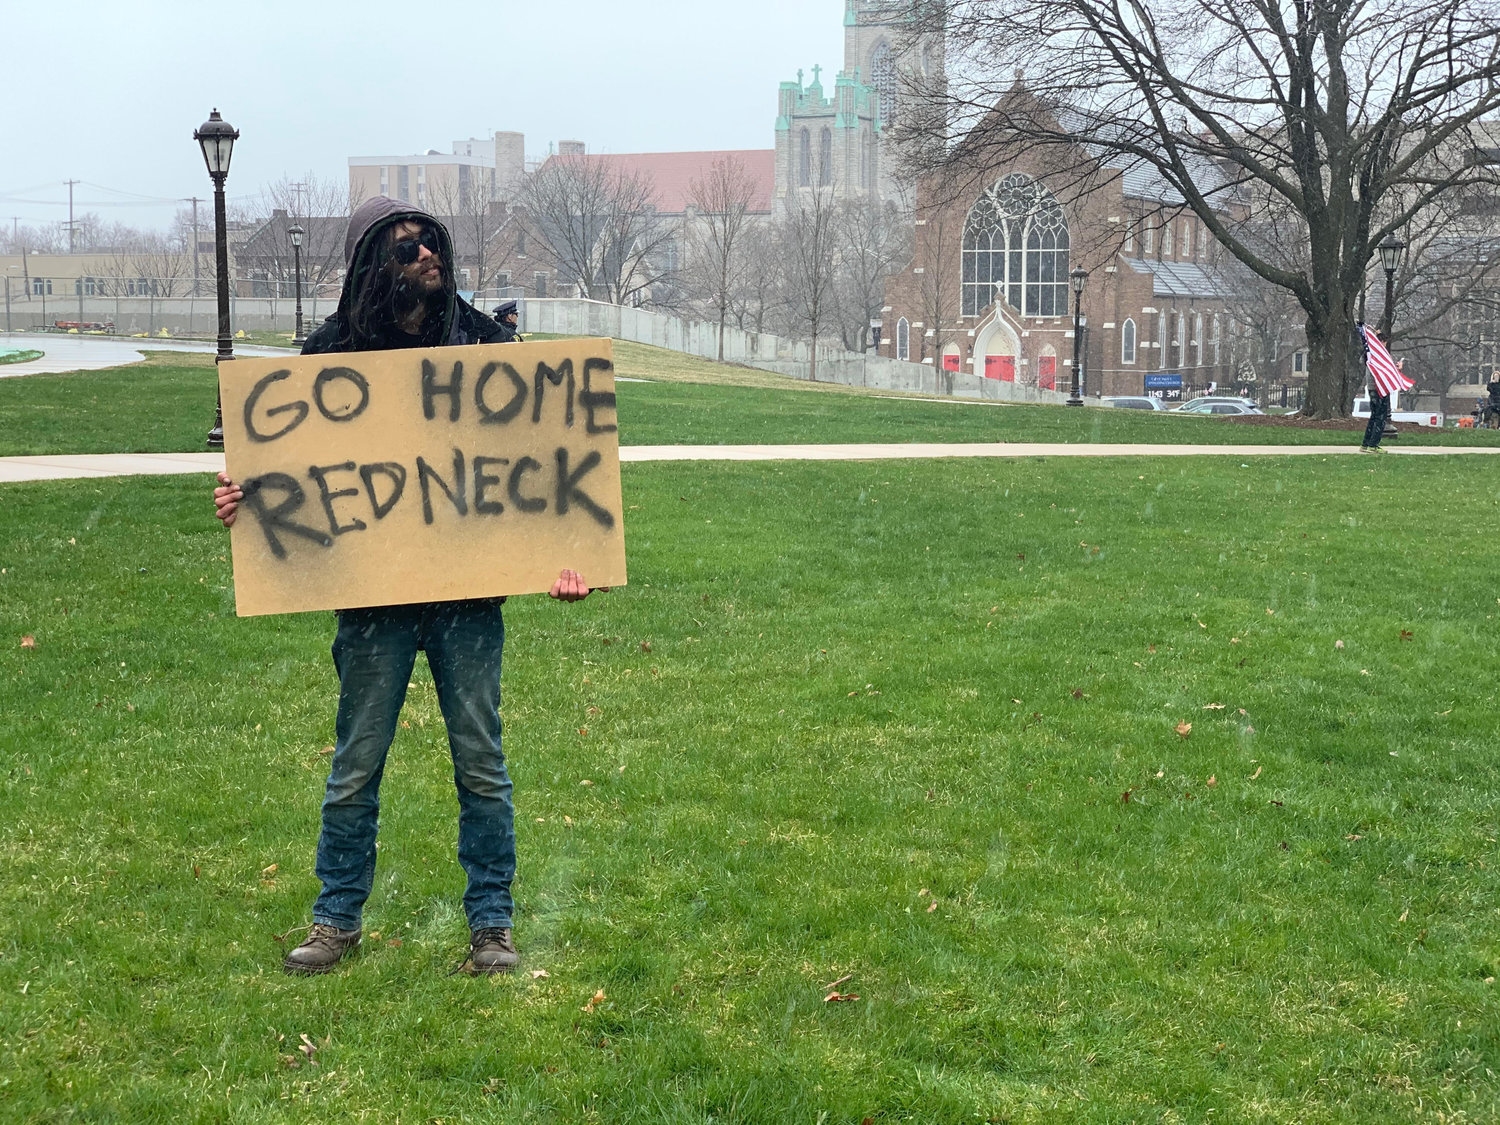 A man with a sign reading "Go Home Redneck."